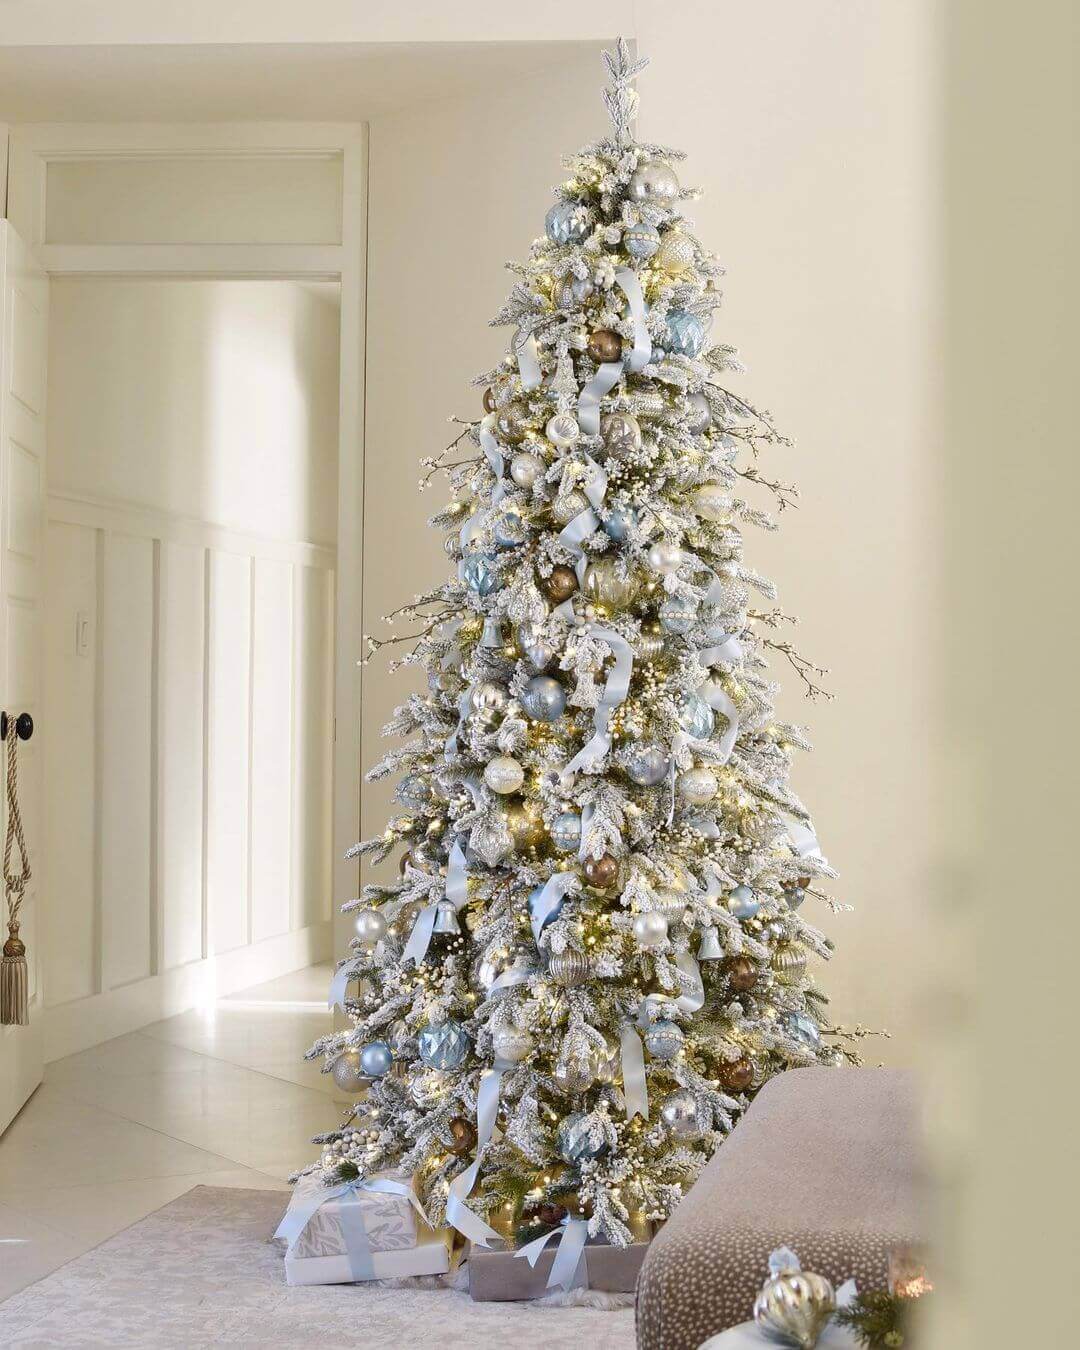 King of Christmas 10' Queen Flock® Slim Artificial Christmas Tree 1000 Warm White LED Lights